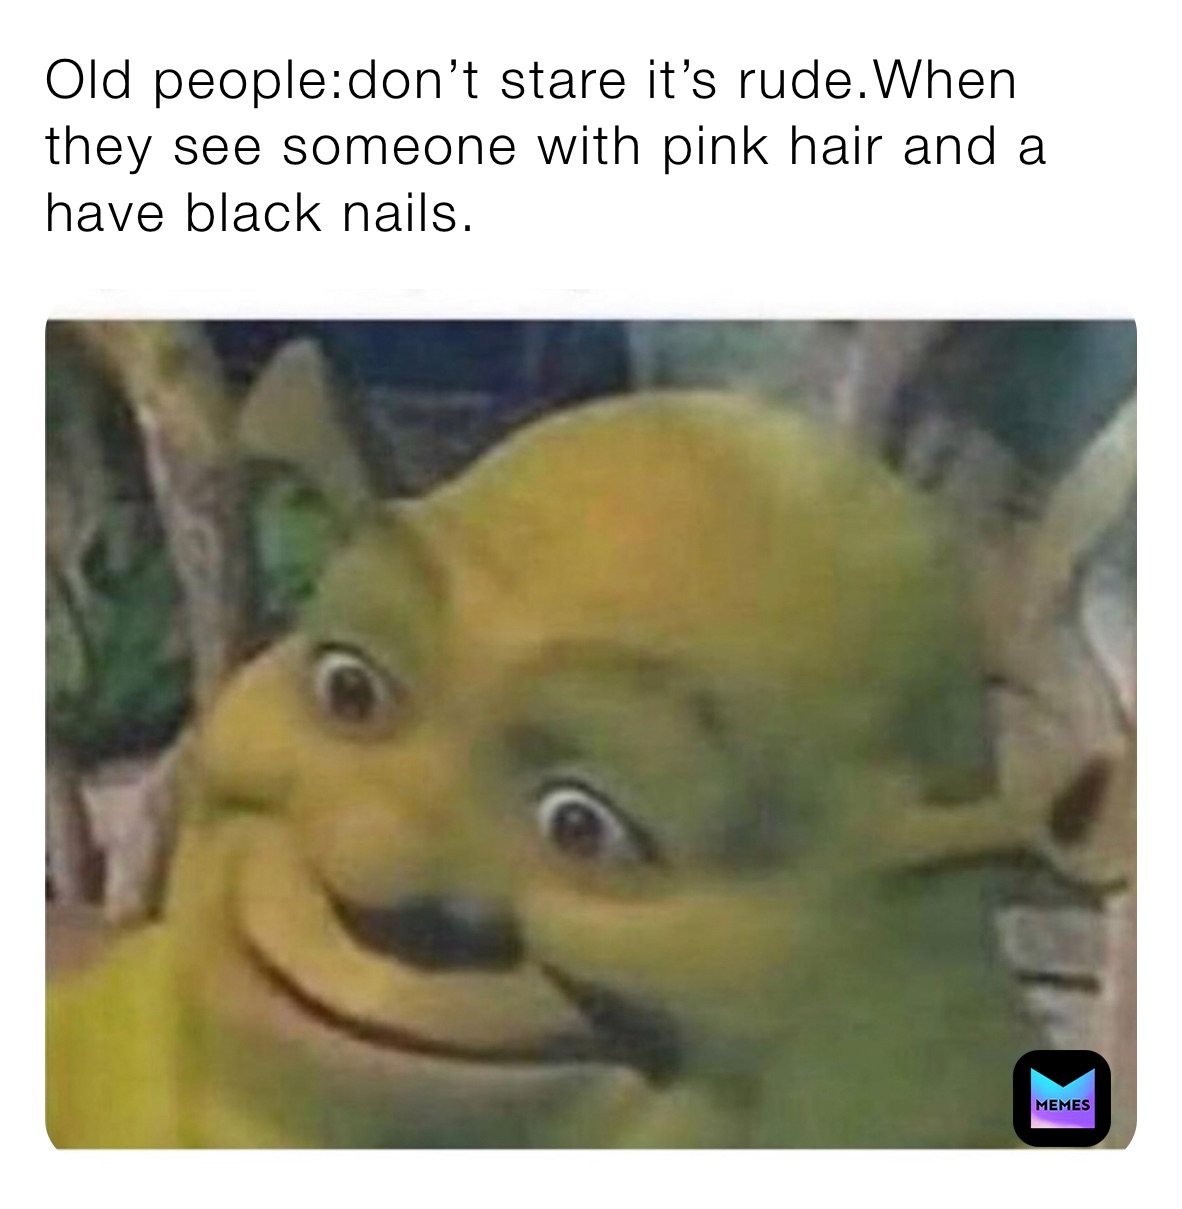 Old people:don’t stare it’s rude.When they see someone with pink hair and a have black nails.